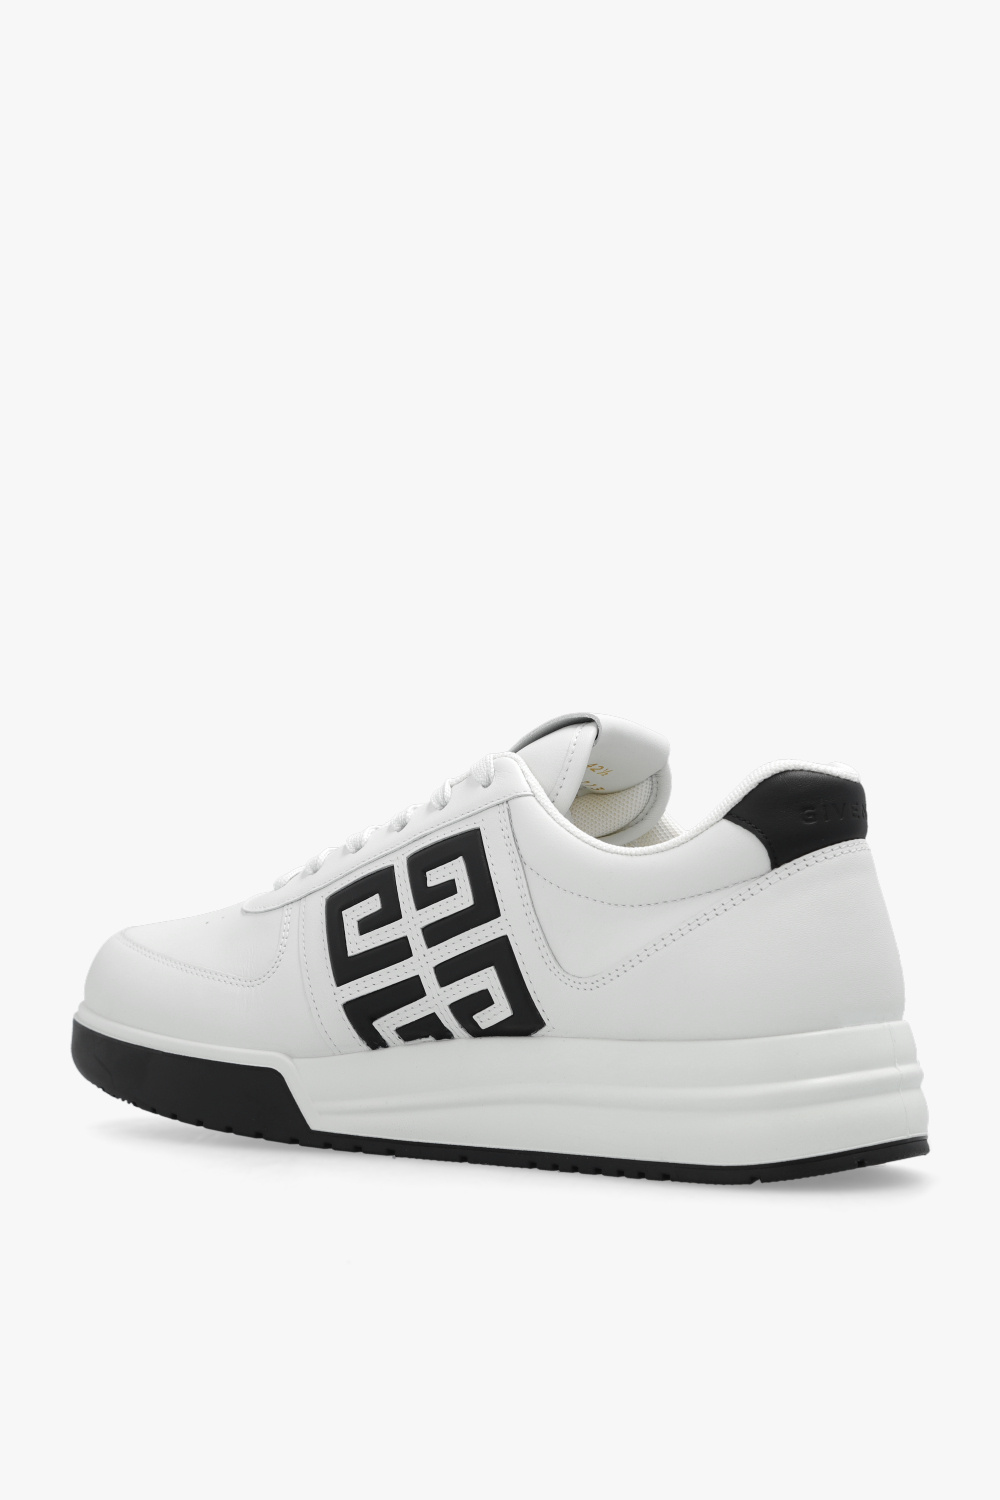 Givenchy ‘G4 Low’ sneakers